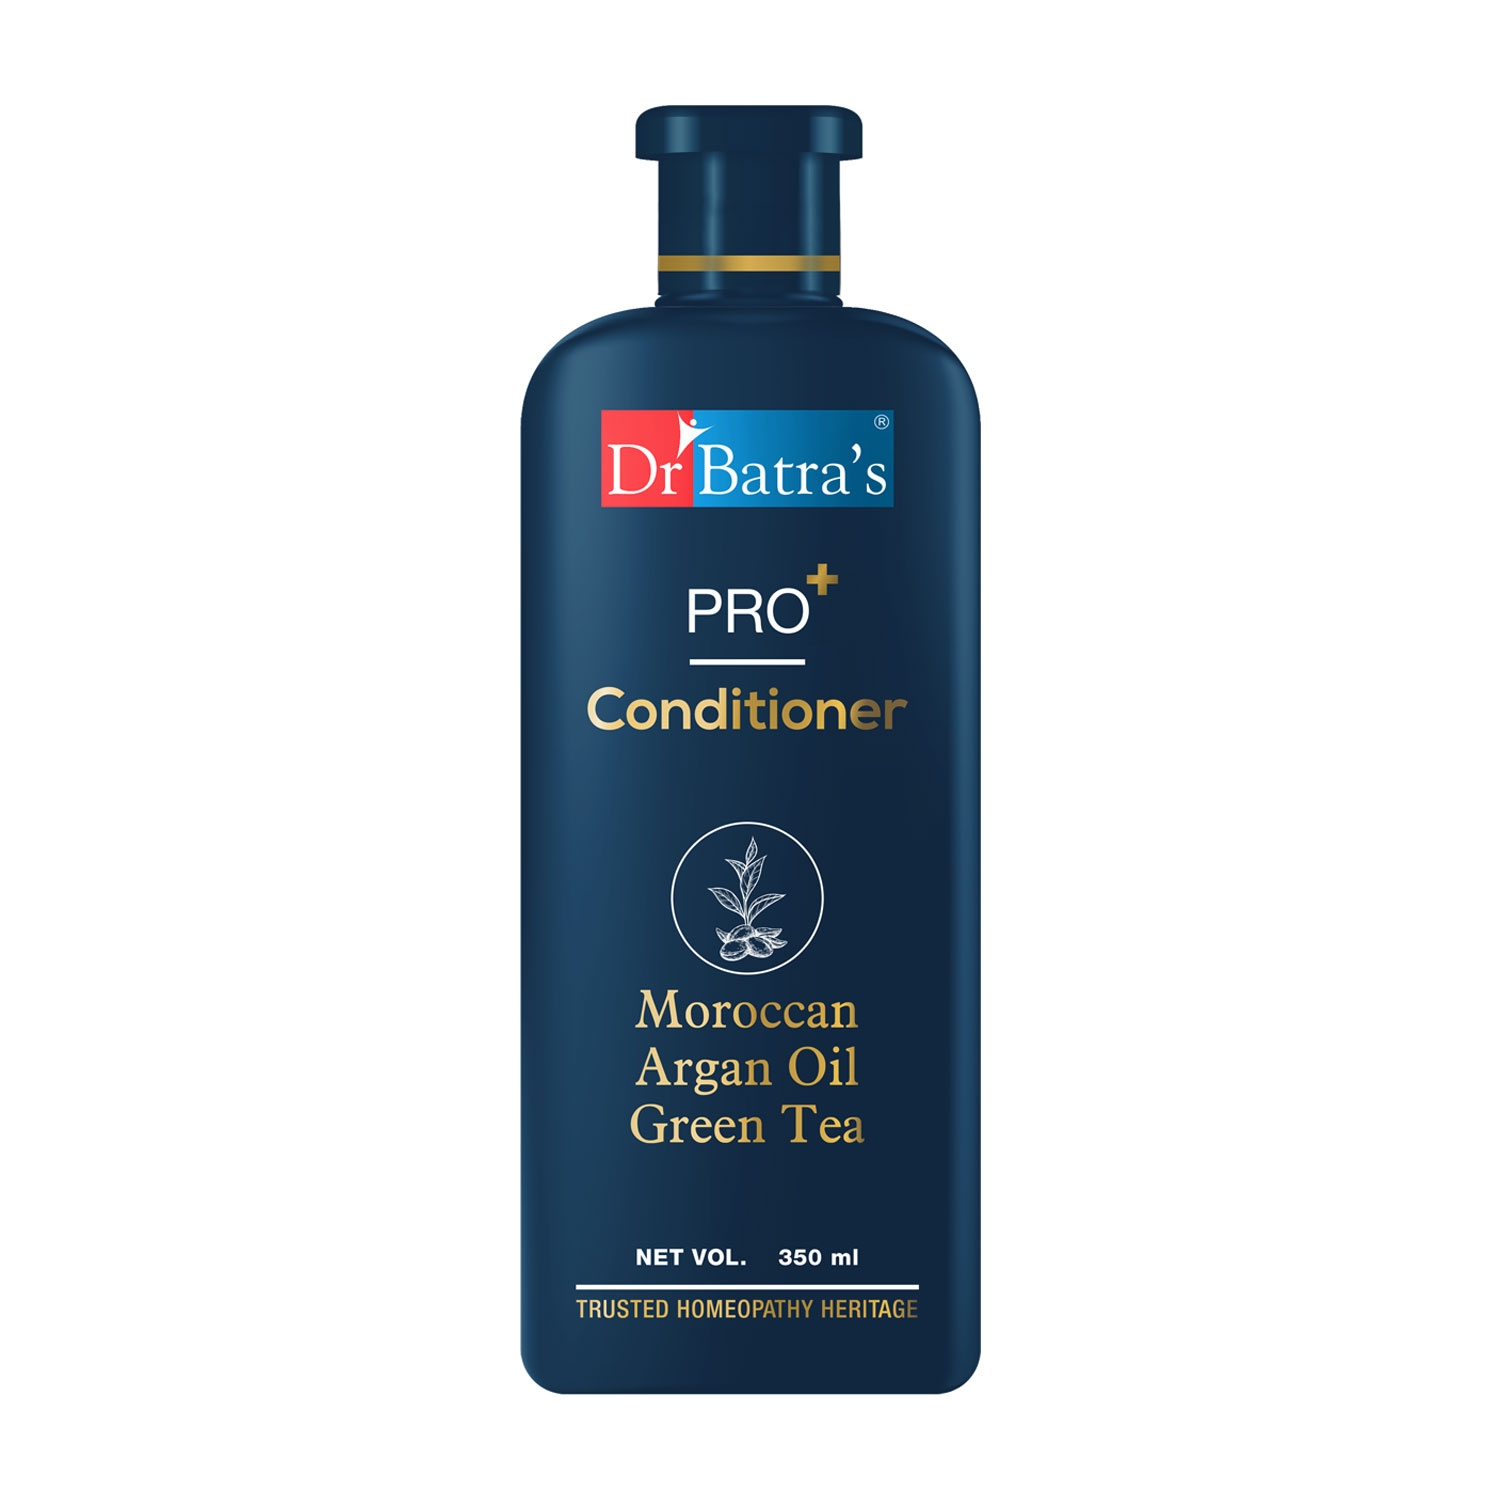 Dr Batra's | Dr Batra’s® PRO+ Conditioner. Contains Moroccan Argan Oil, Green Tea, Castor Oil, Horsetail plant, Thuja Extracts. Sulphate, Paraben, Silicone Free. Suitable for men and women. 350 ml